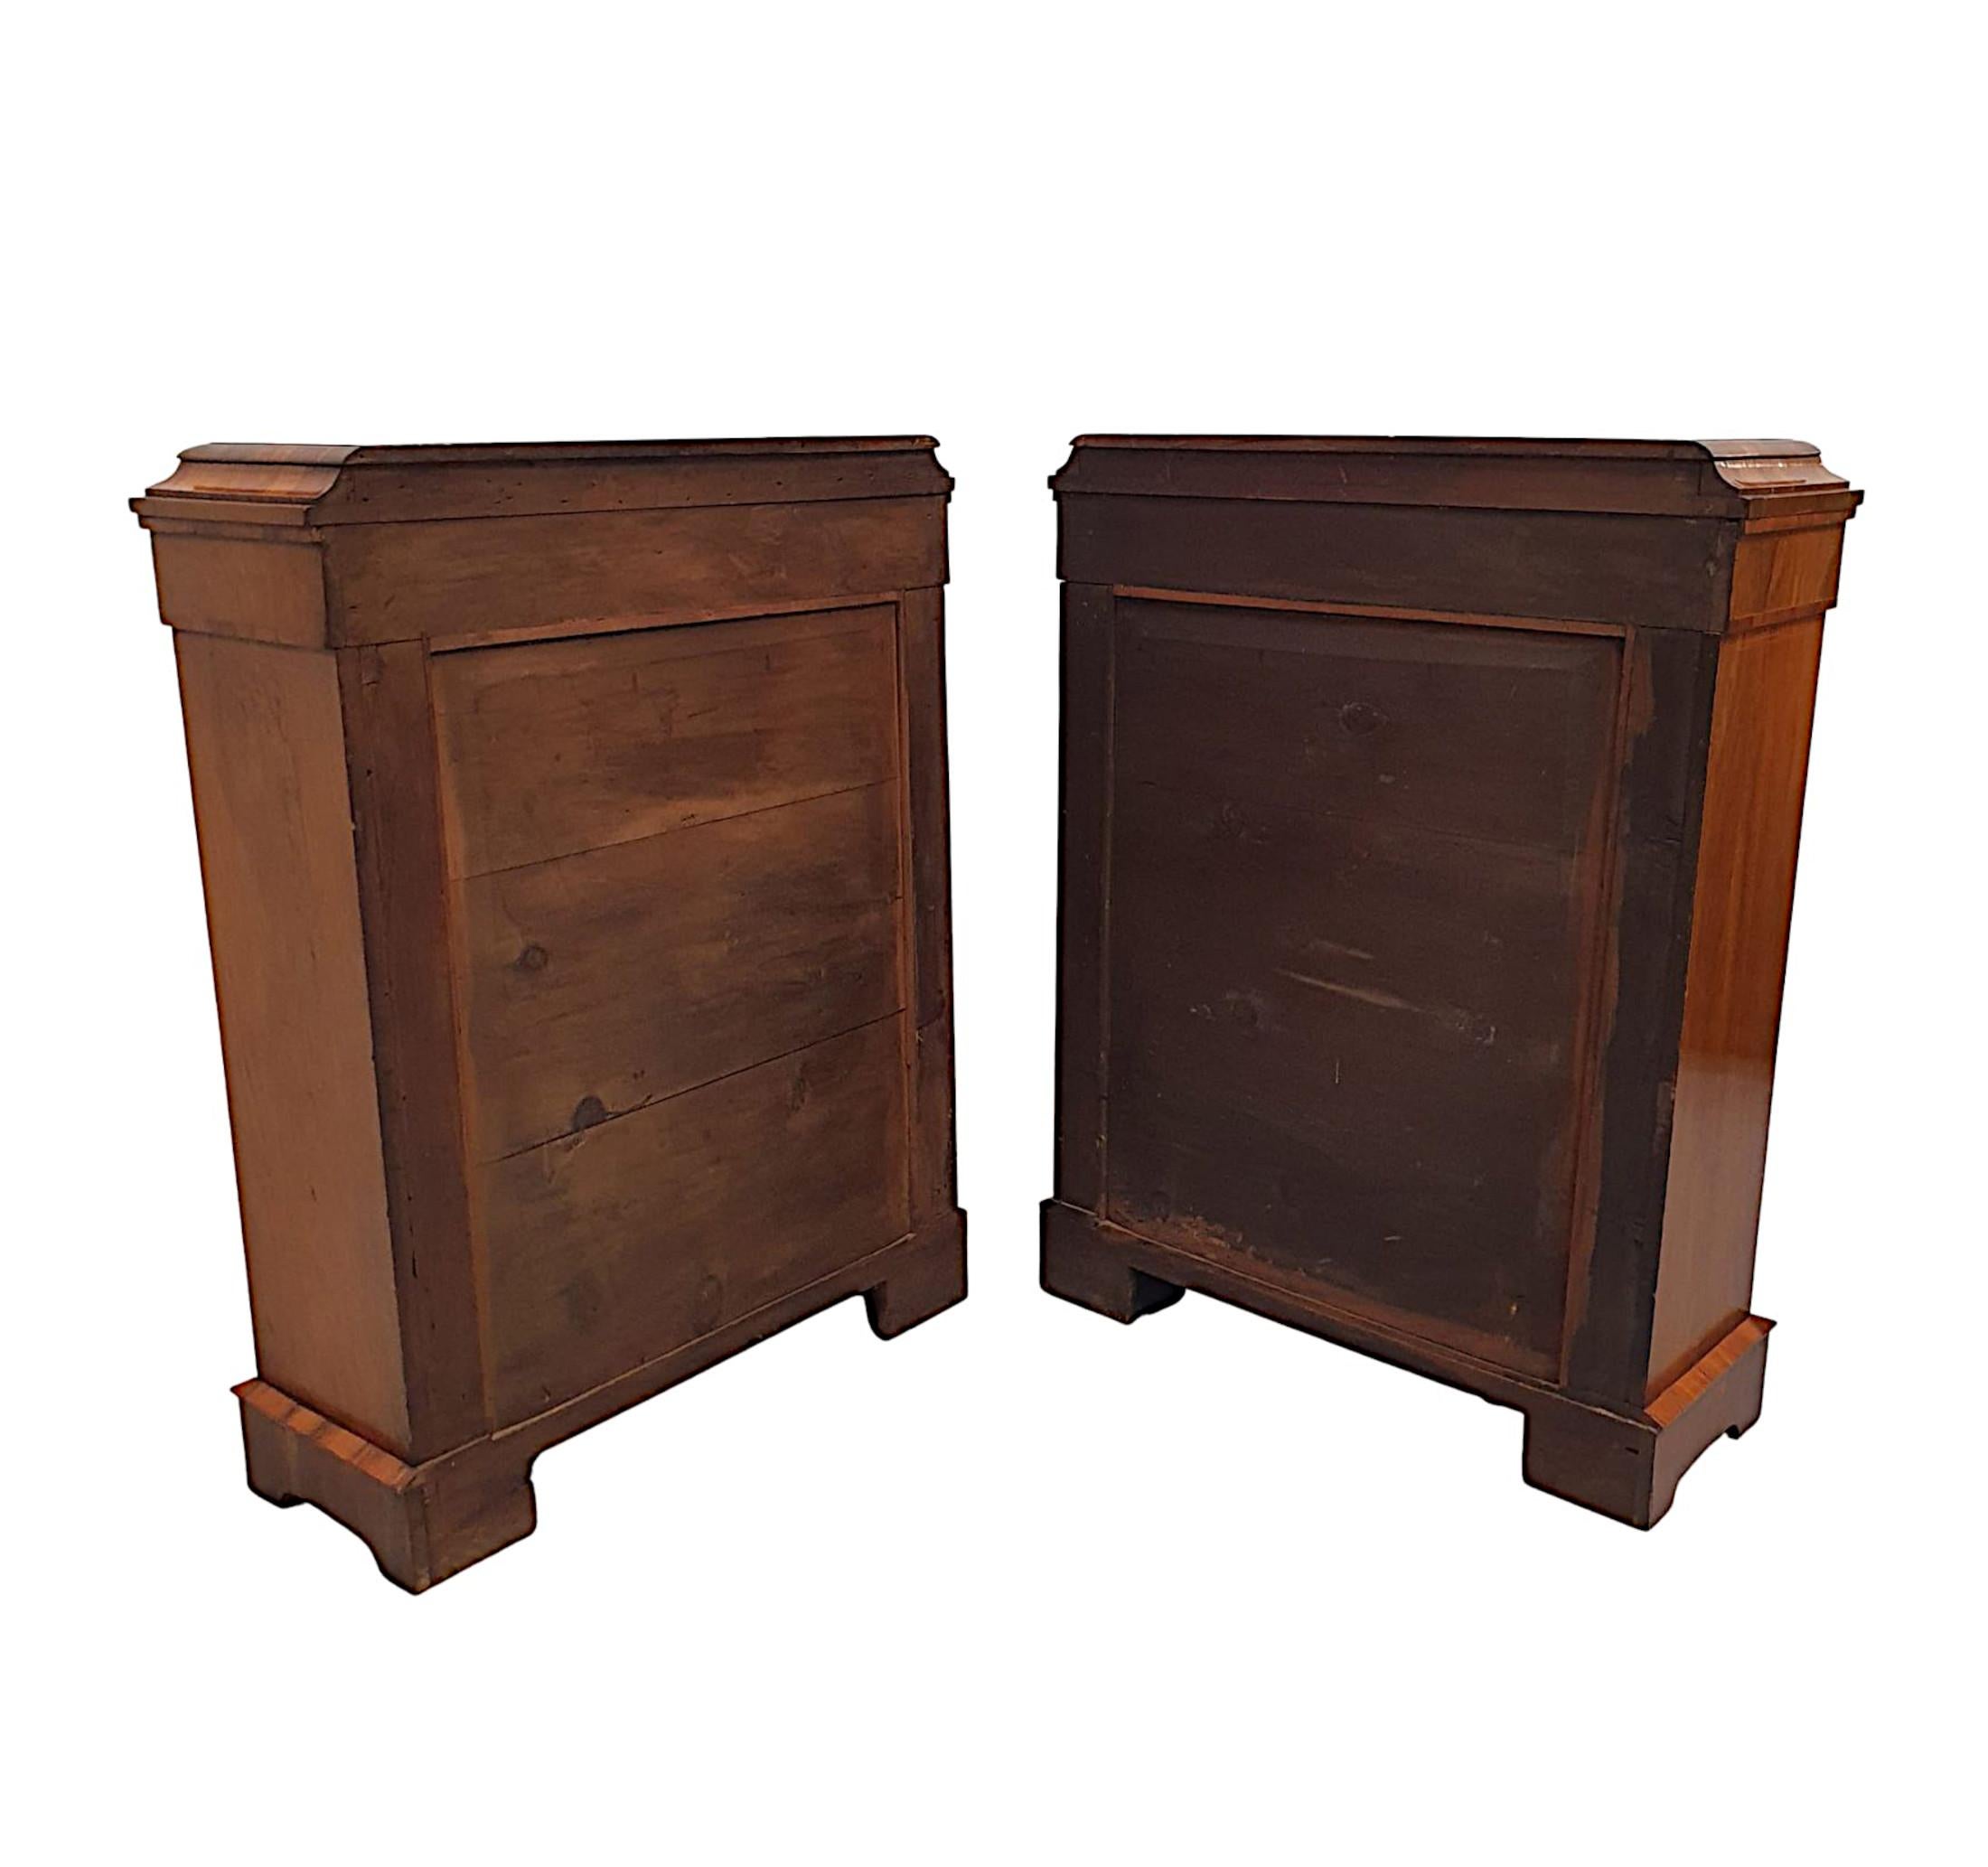 Exceptional Pair of Rare 19th Century Pier Cabinets or Bookcases For Sale 3